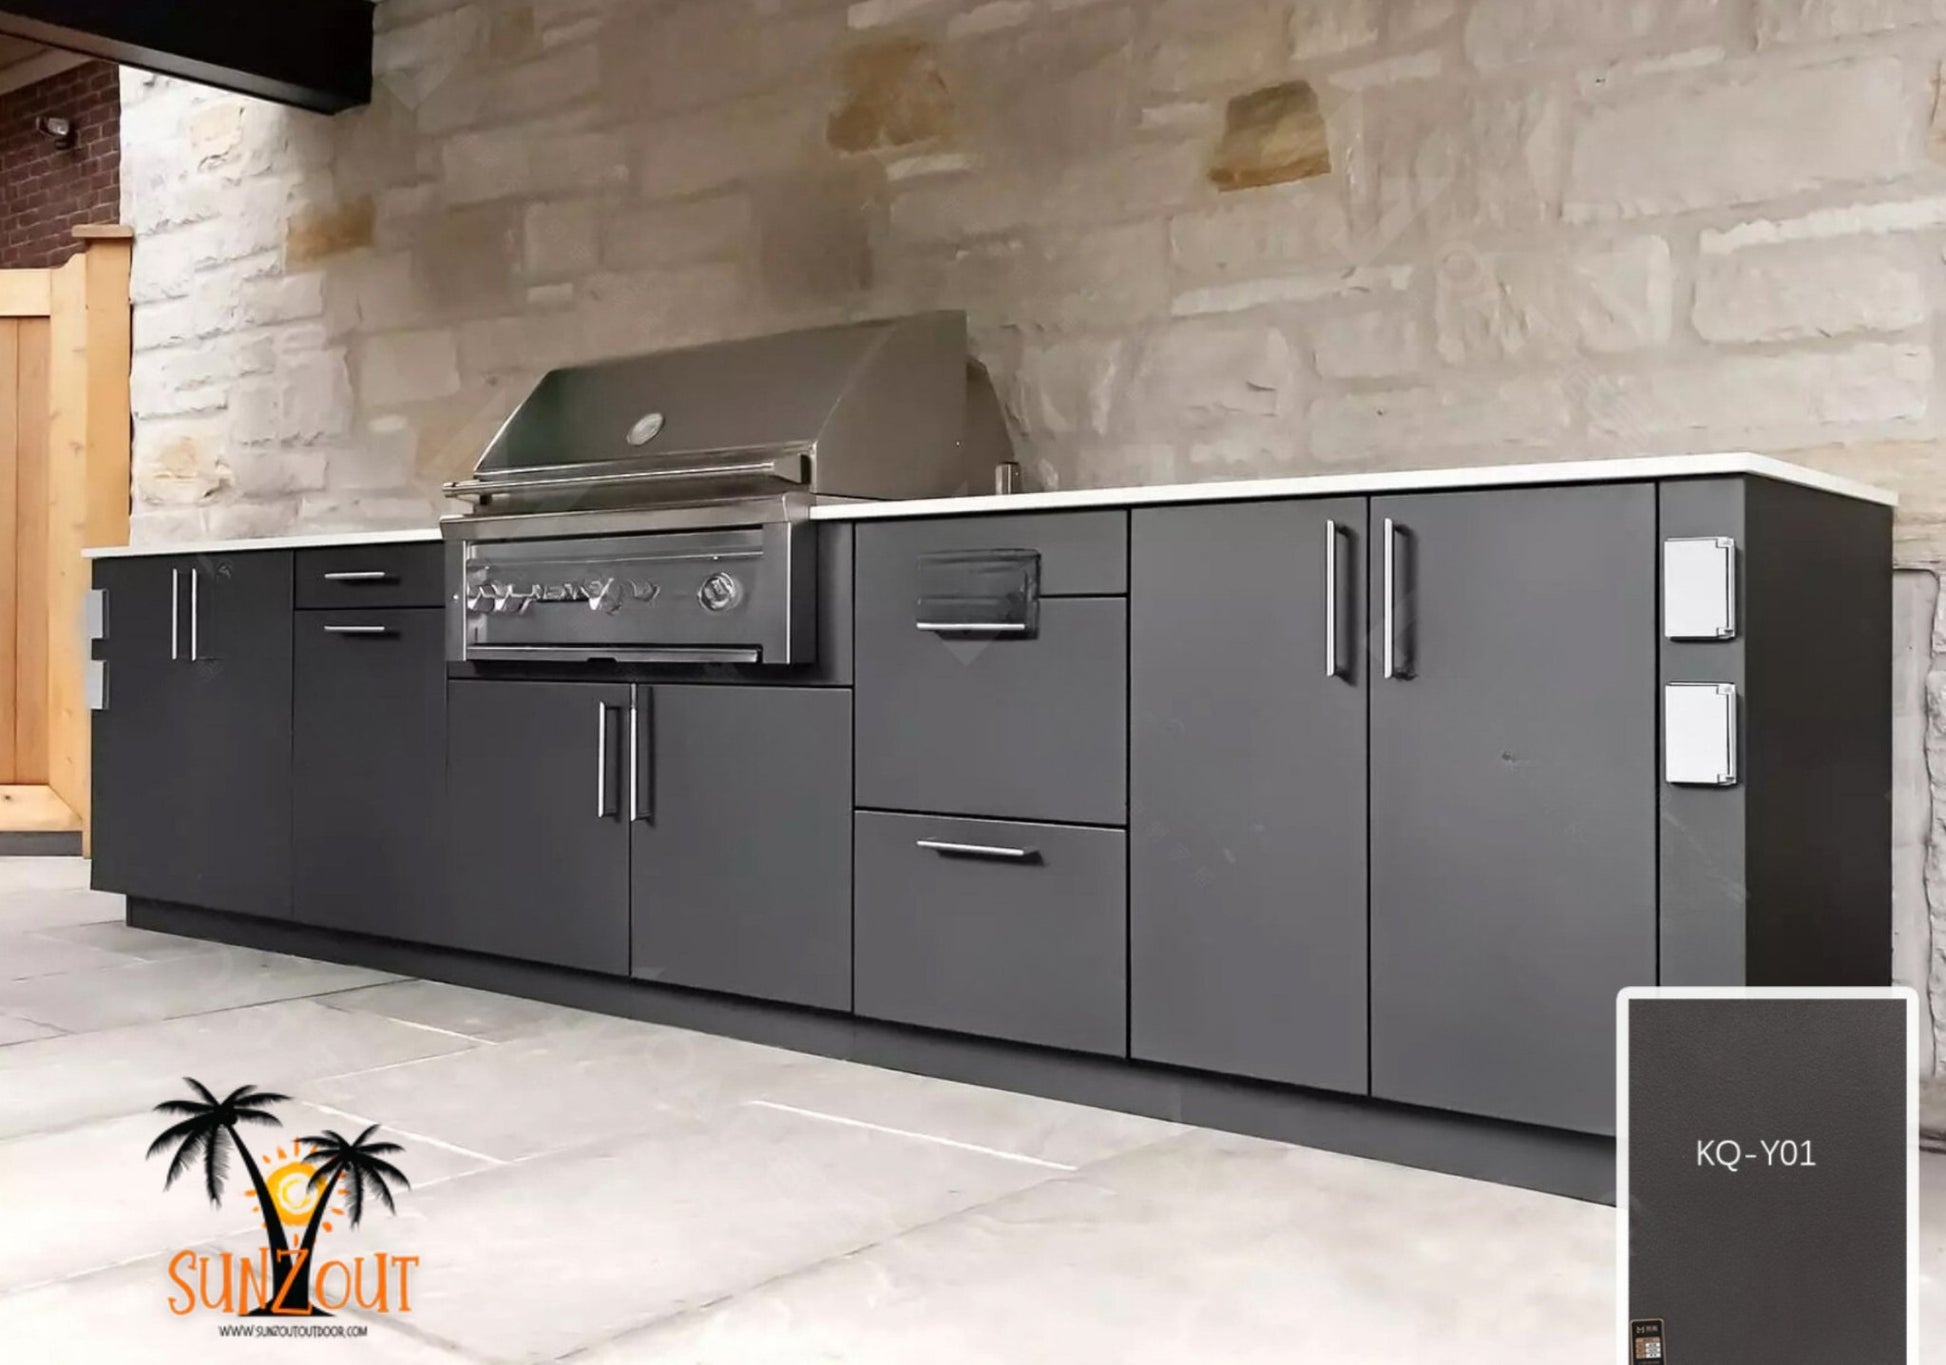 12 ft Dark Grey Sunzout Designer Series Modular Outdoor Kitchen available in multiple Colors with 34 in 4 Burner Grill - Sunzout Outdoor Spaces LLC